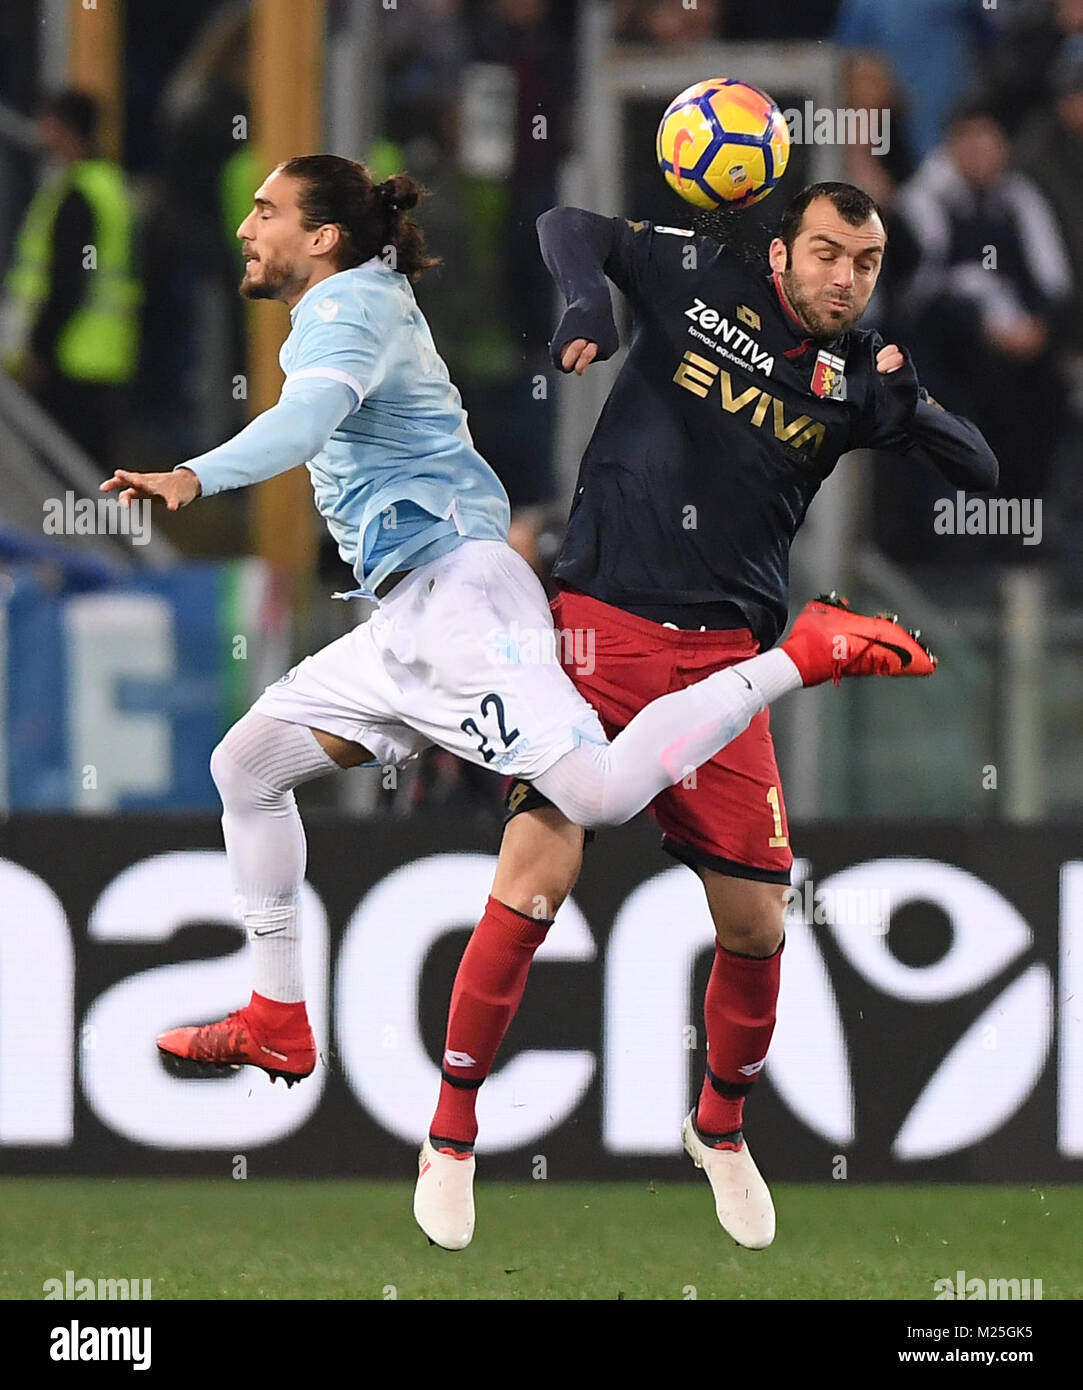 Roma, Italy. 5th Feb, 2018. Lazio's Martin Caceres(L) competes with Genoa's Goran Pandev during a Serie A soccer match between Lazio and Genoa in Rome, Italy, Feb. 5, 2018. Genoa won 2-1. Credit: Alberto Lingria/Xinhua/Alamy Live News Stock Photo